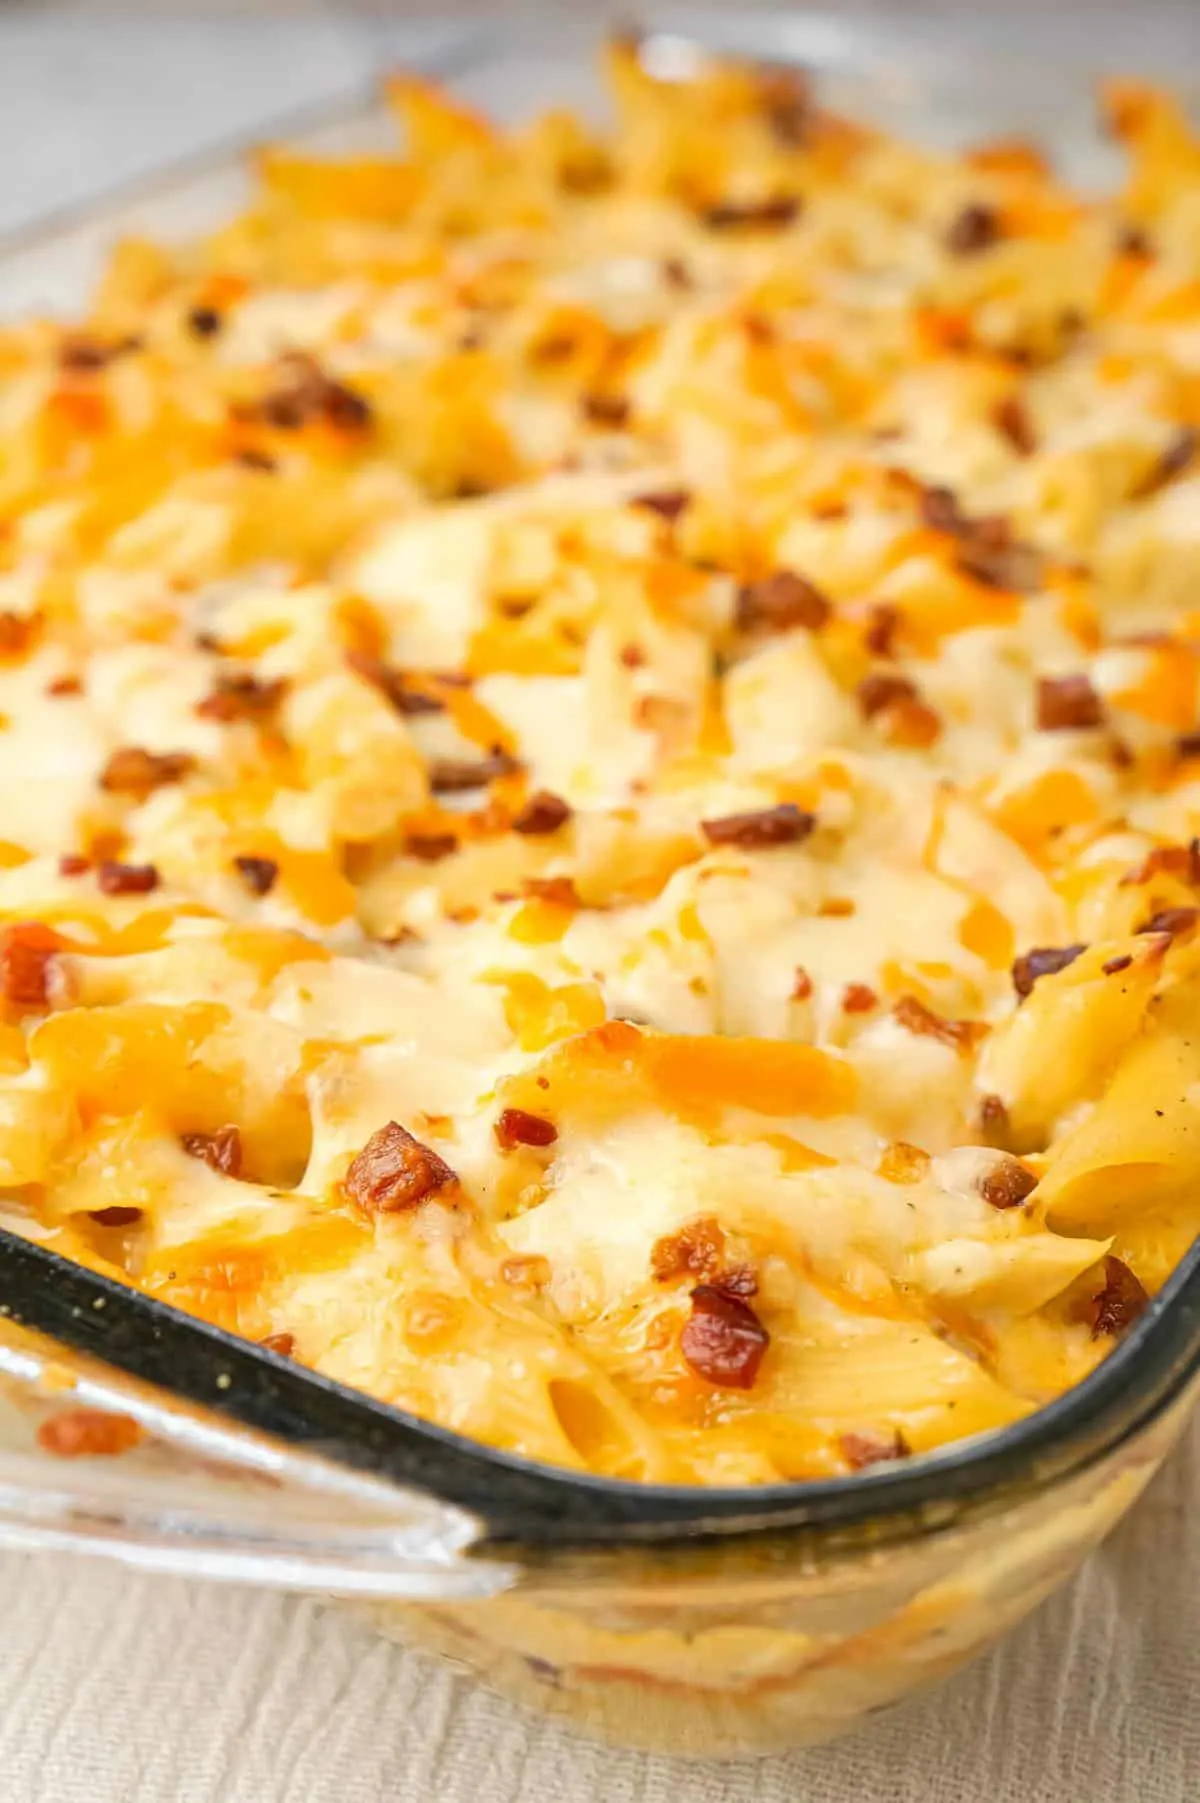 Cheddar Bacon Ranch Chicken Pasta is a delicious baked pasta recipe loaded with crumbled bacon, shredded chicken and cheddar cheese all in a creamy sauce made with cheddar cheese soup, cream of bacon soup and ranch dip mix.